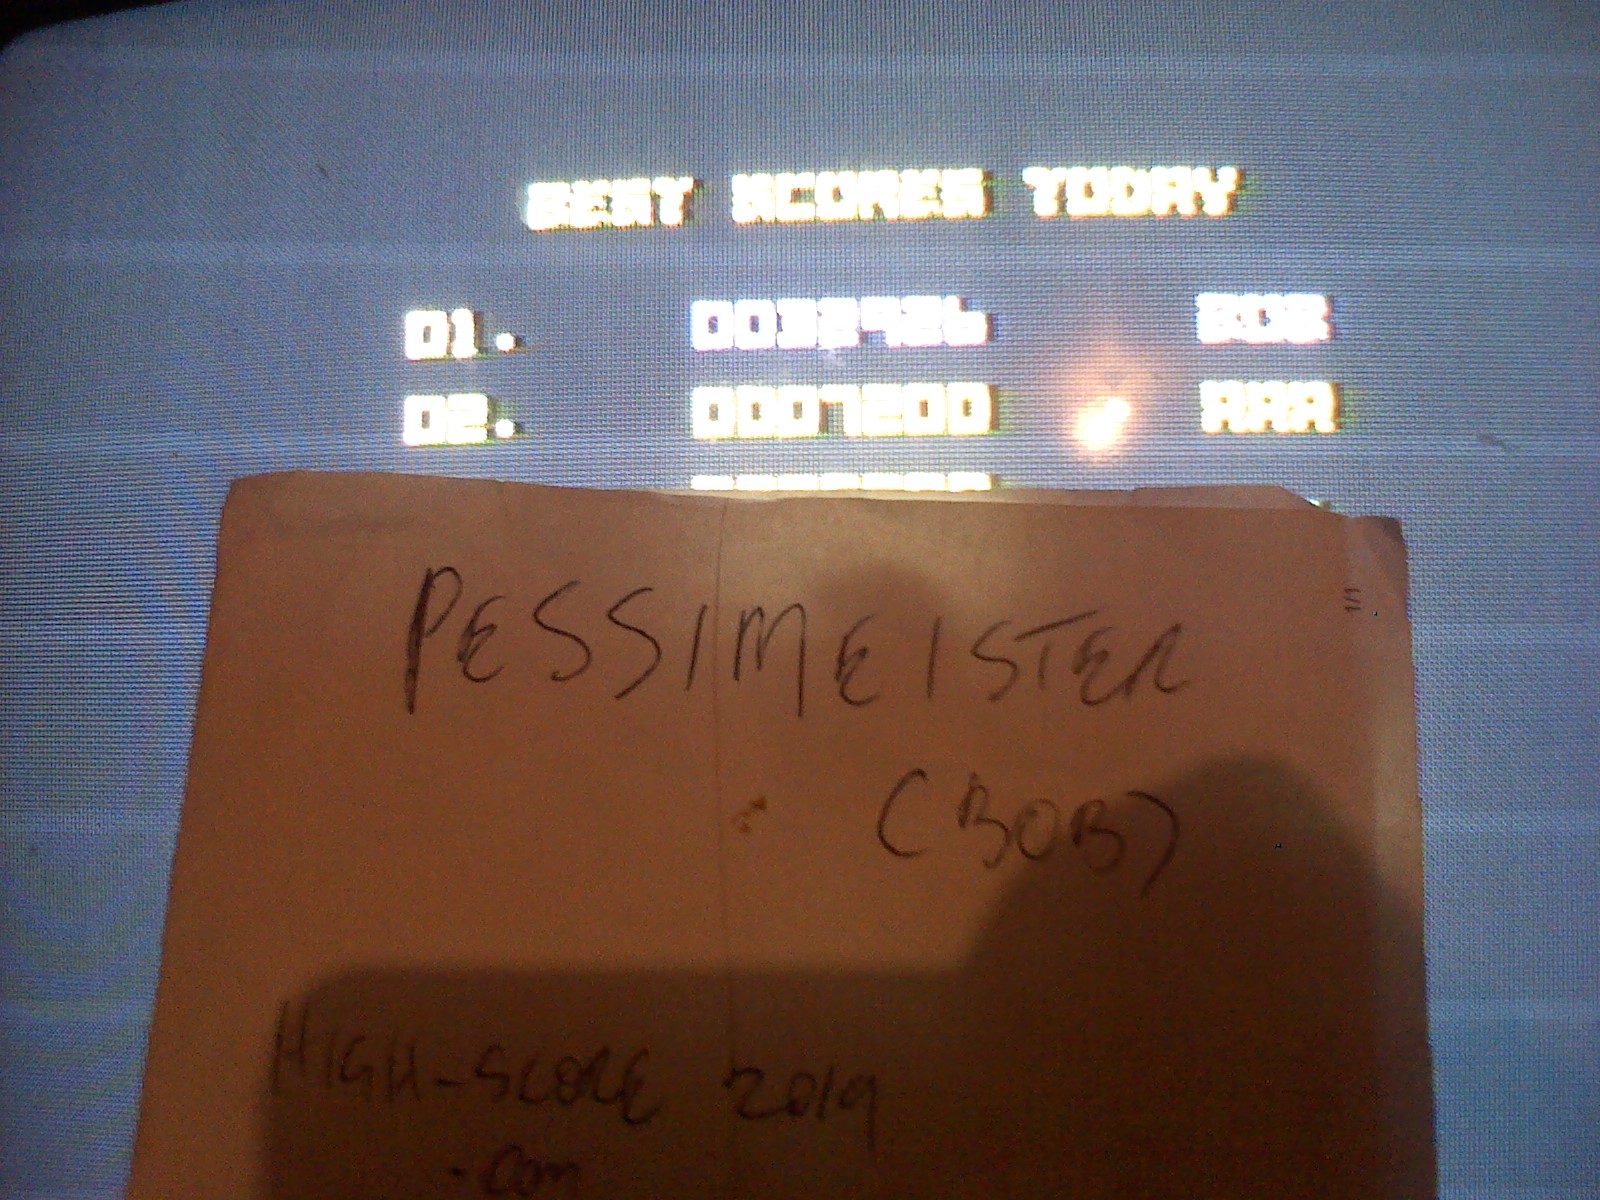 Pessimeister: Flying Shark (Commodore 64) 32,926 points on 2019-09-29 04:31:56